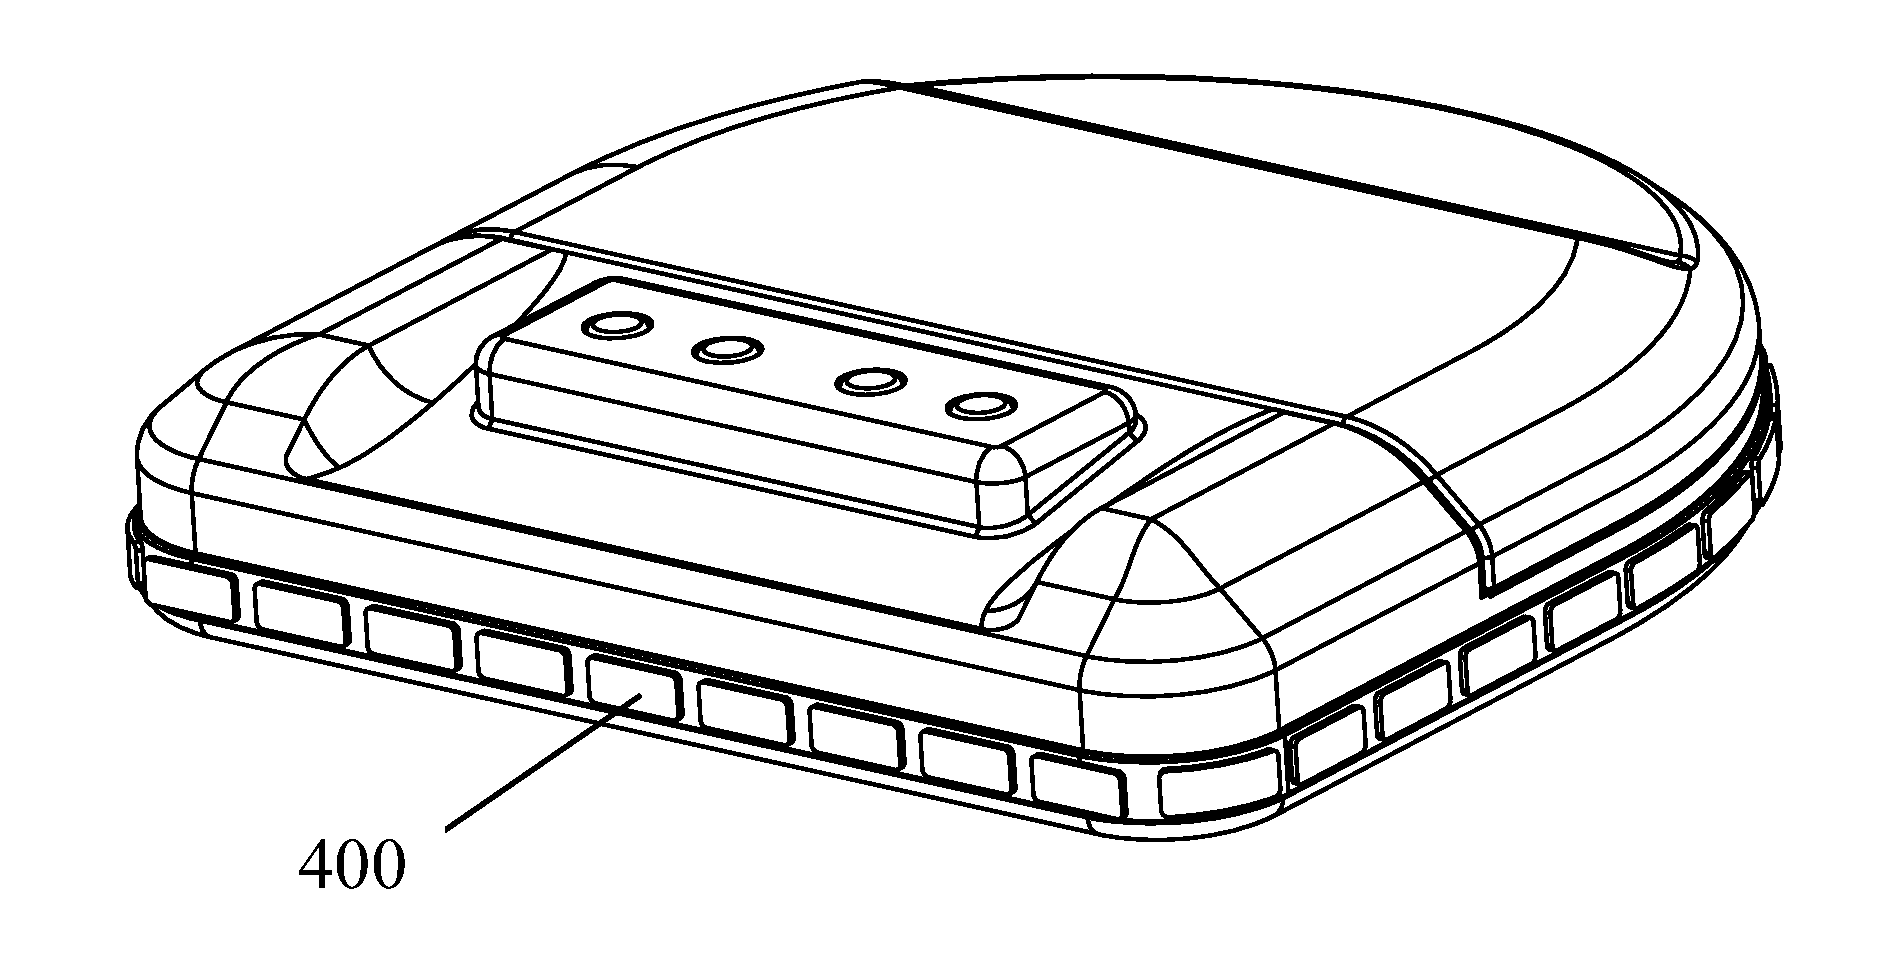 Bumper Structure for an Automatic Moving Device